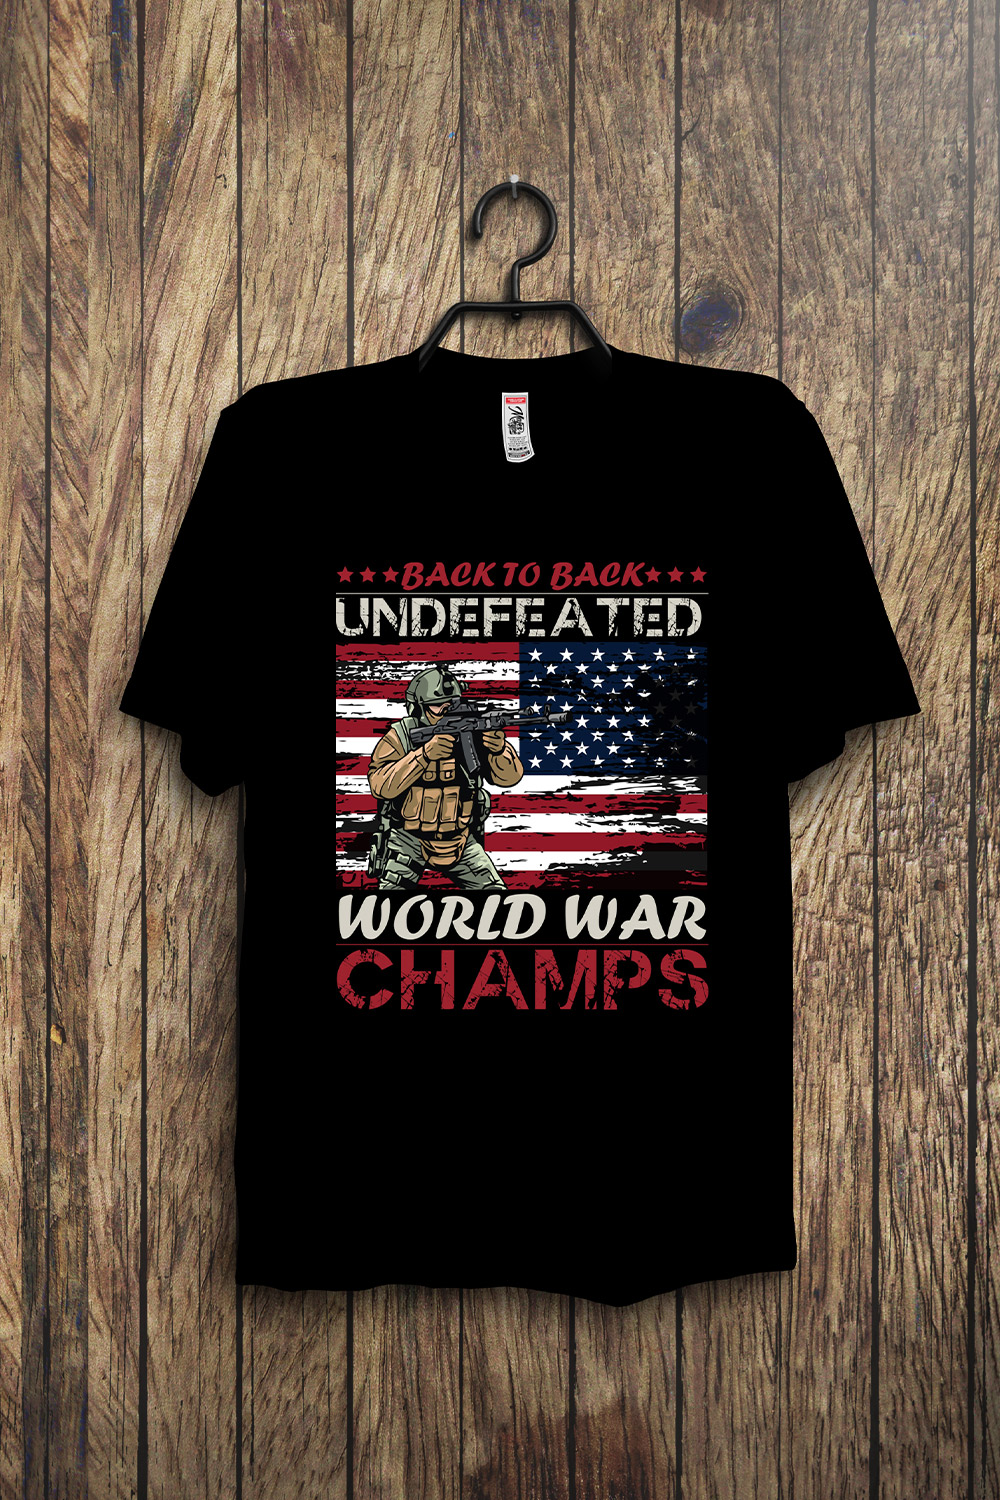 US army t shirt pinterest preview image.